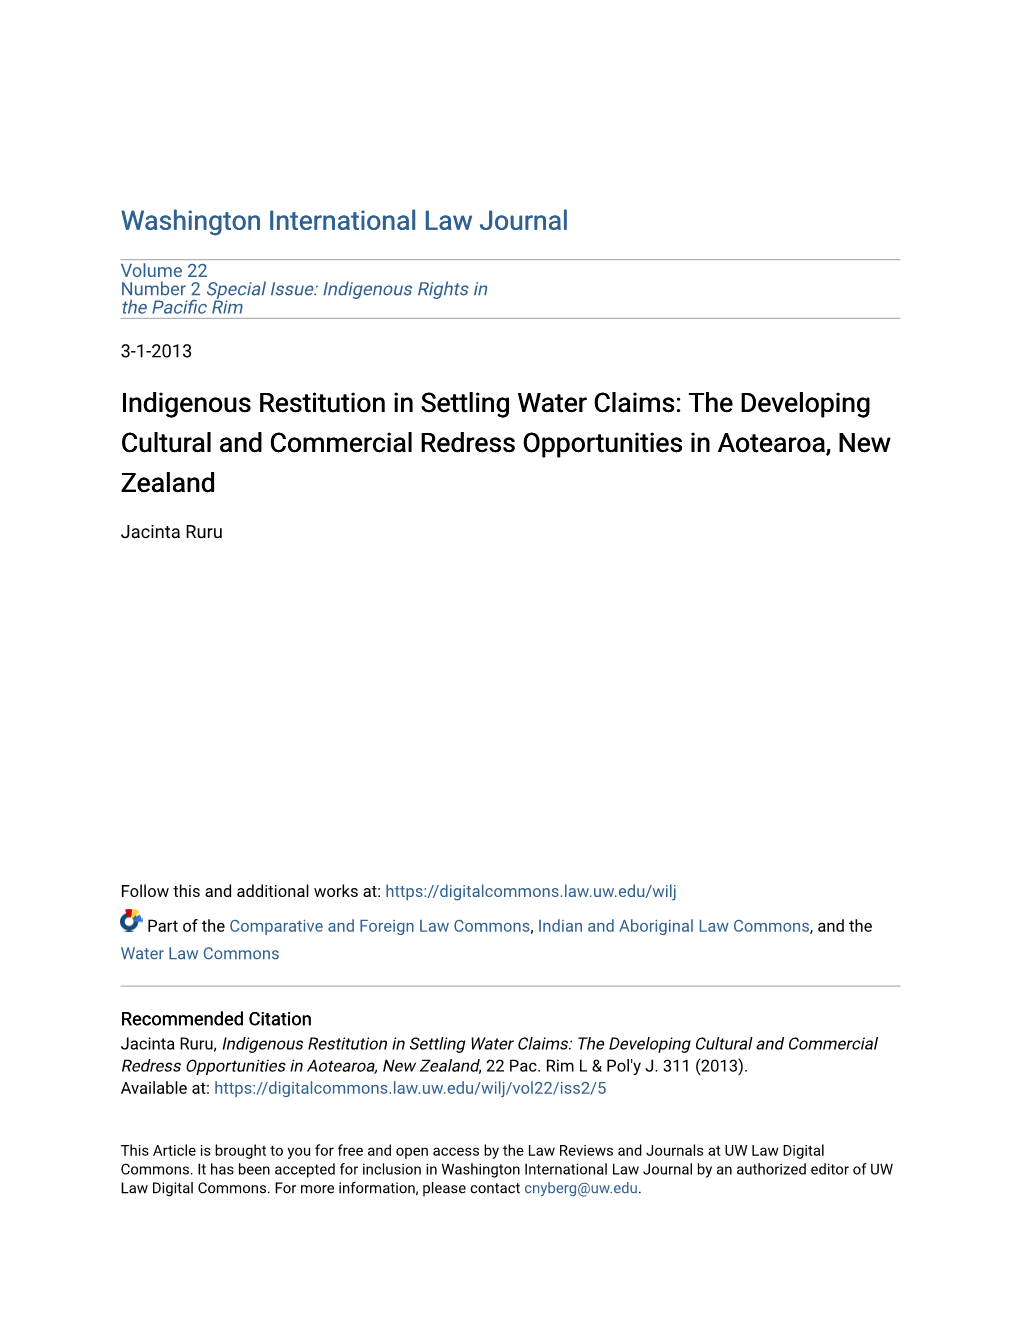 Indigenous Restitution in Settling Water Claims: the Developing Cultural and Commercial Redress Opportunities in Aotearoa, New Zealand